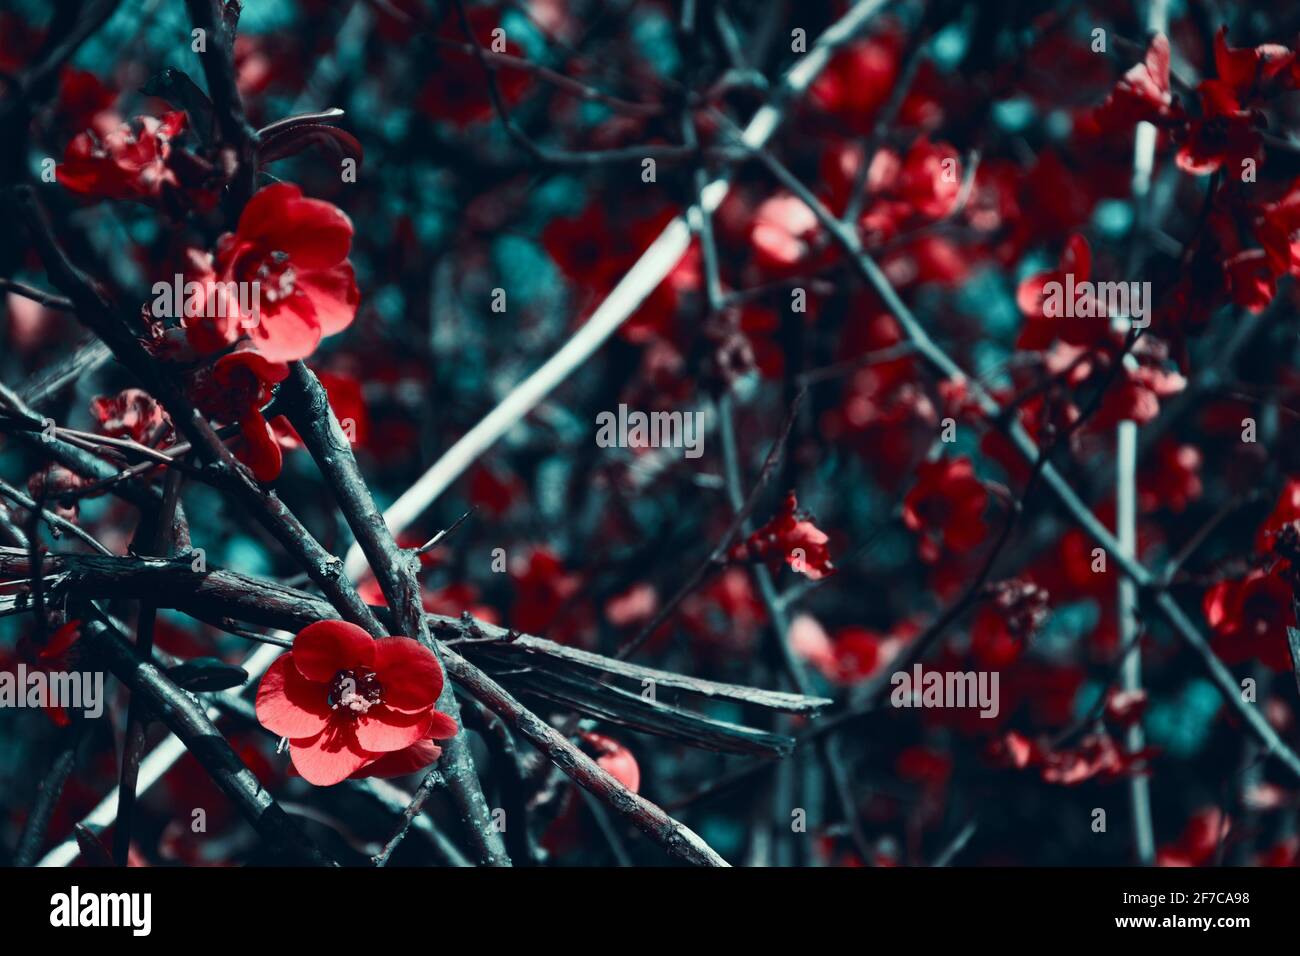 Japanese quince (Chaenomeles) bush blossoming with red flowers. Retro toned dreamy floral background. Selective focus and blur. Stock Photo